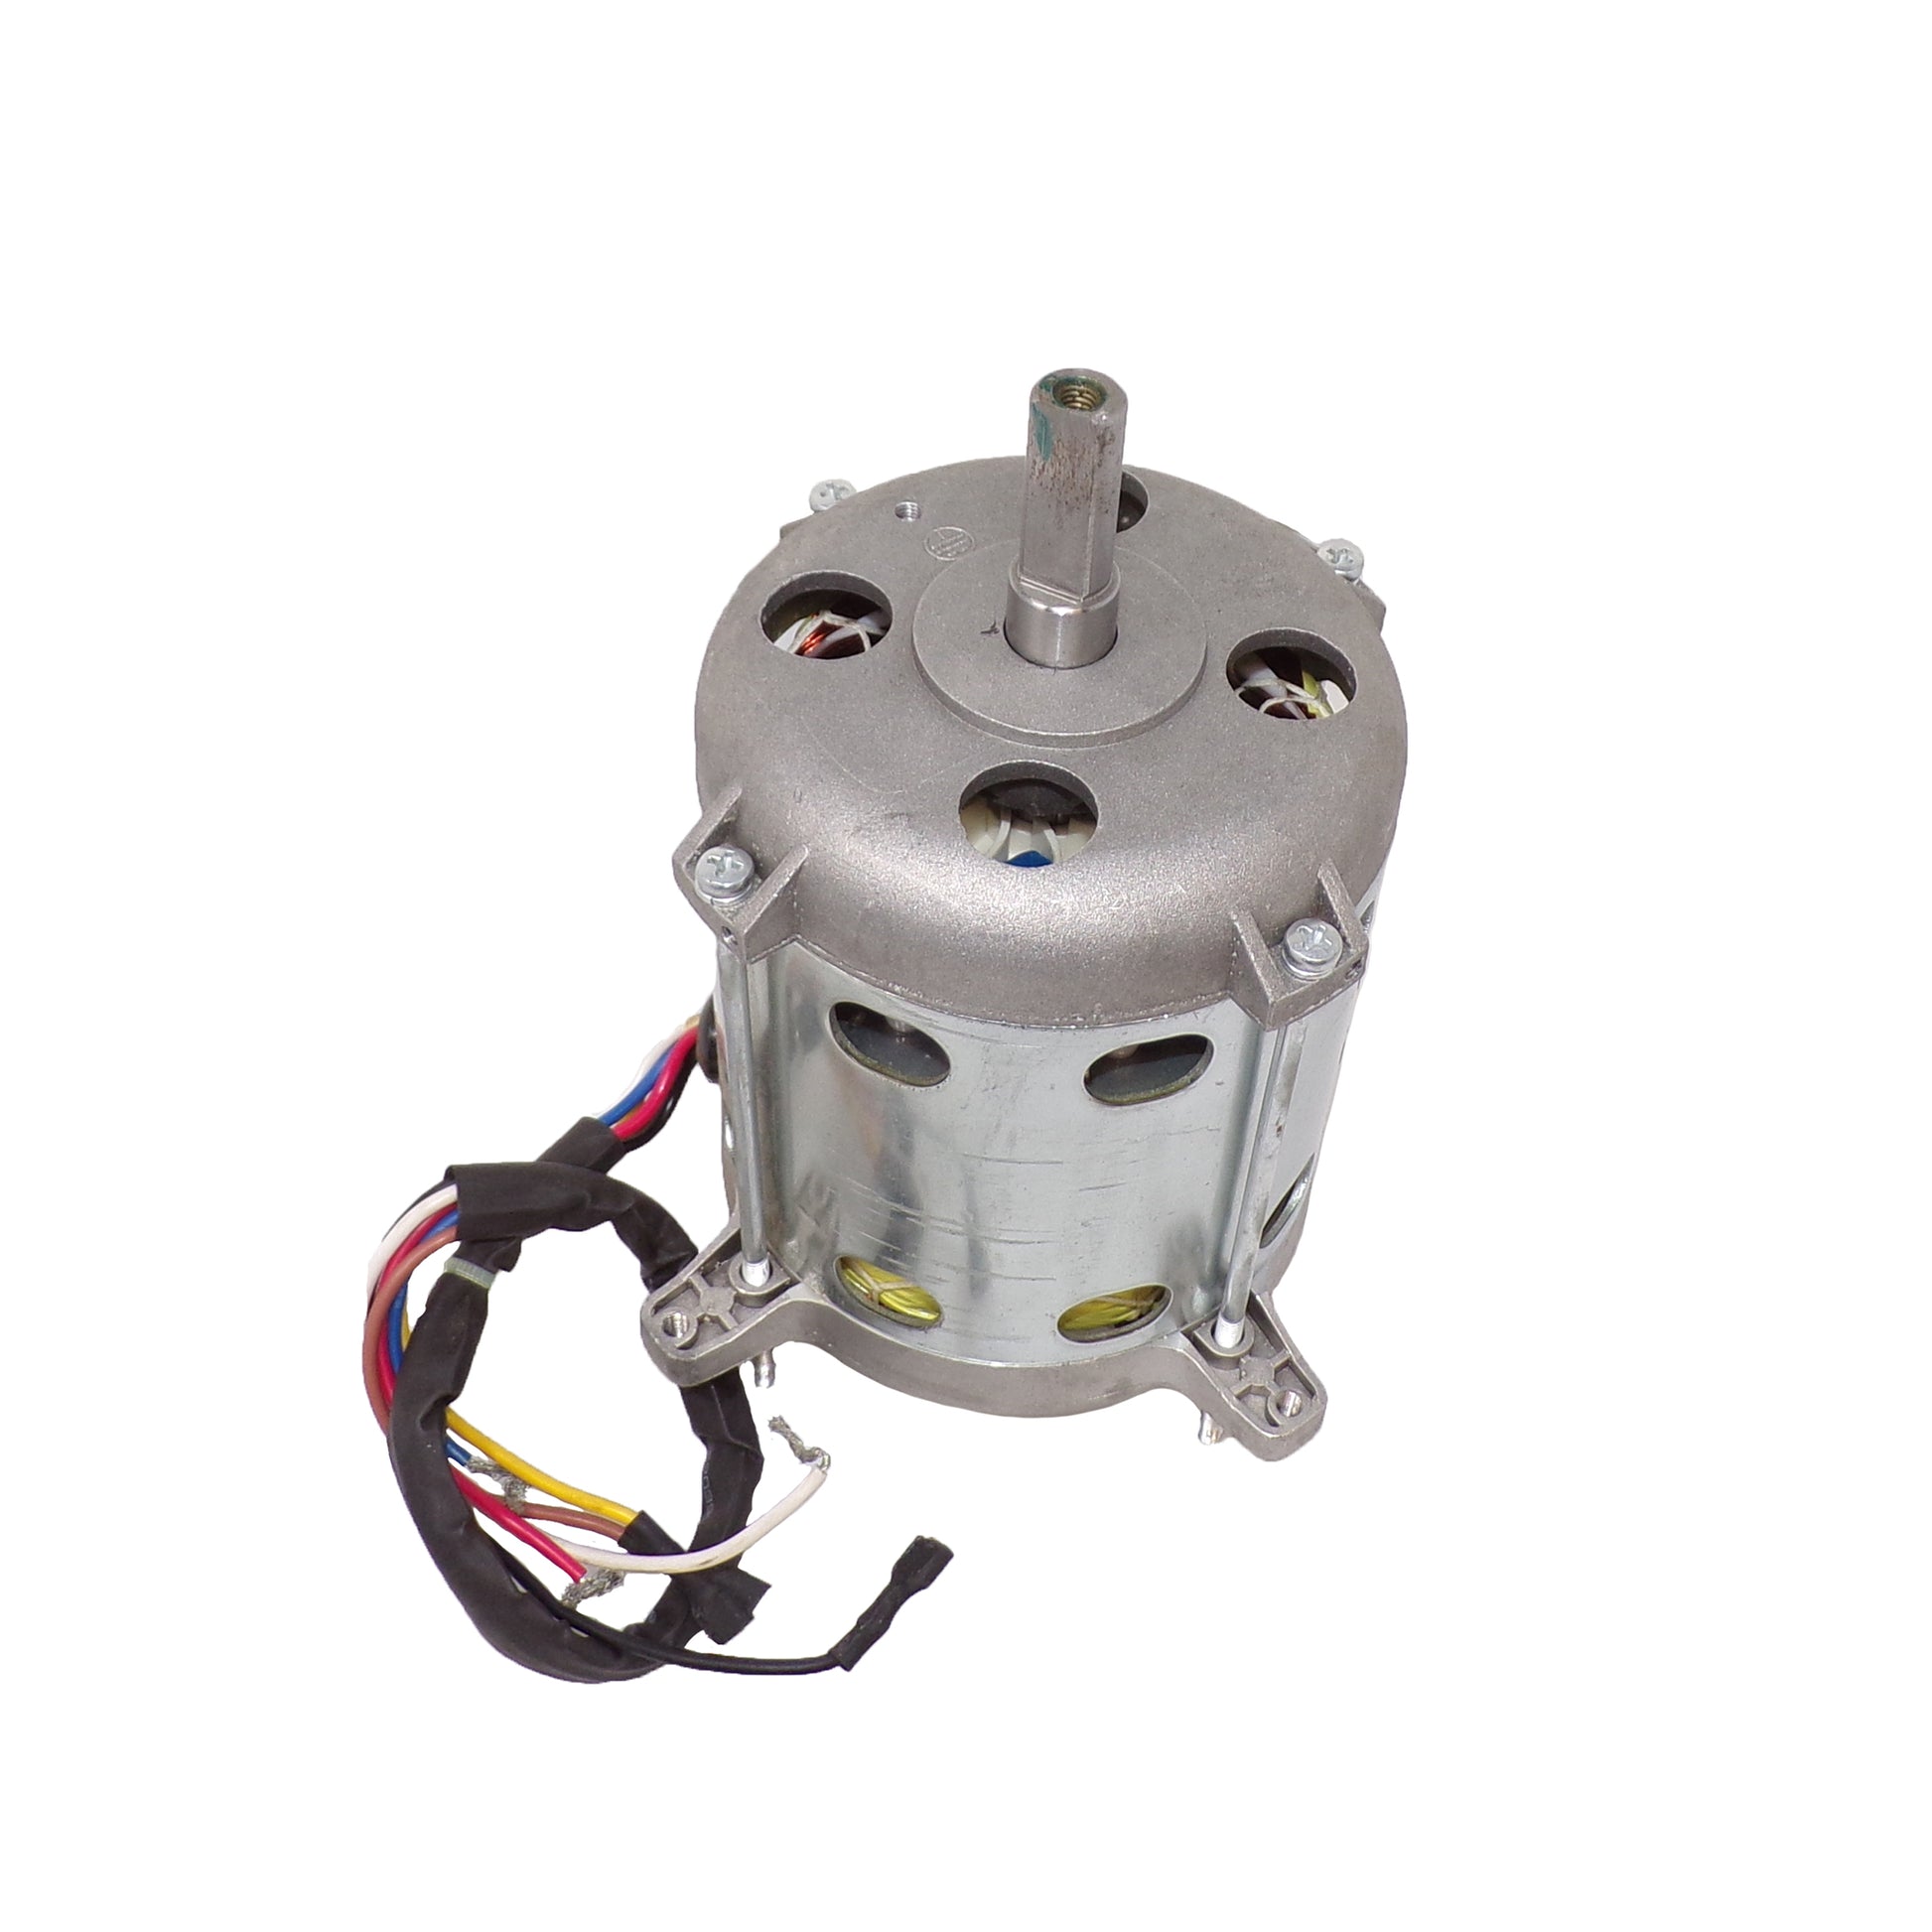 Motor for 800-Series Air Mover